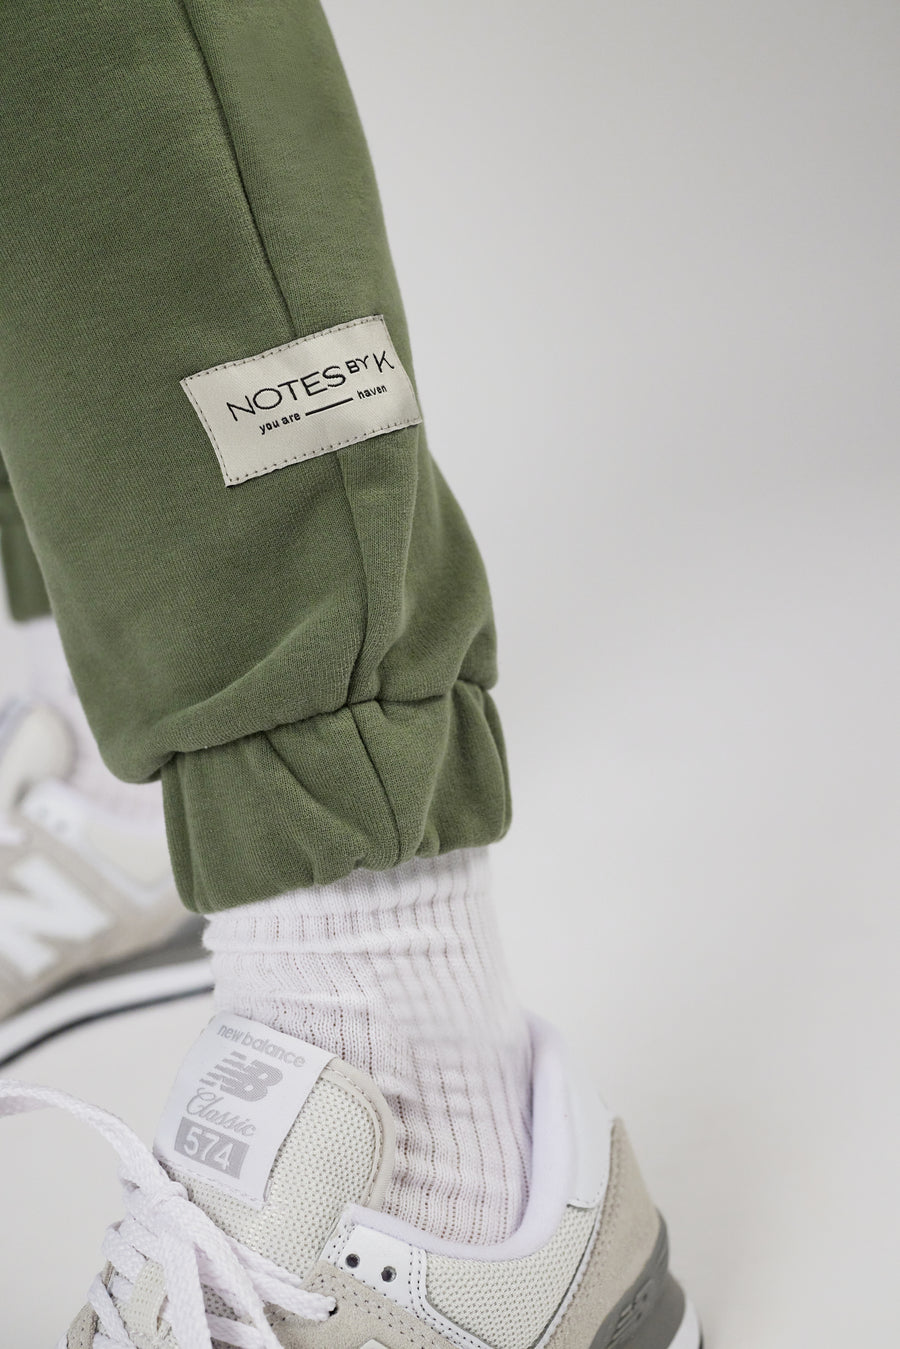 Woven label detail on bottom hem of a sweatpants in color sage green